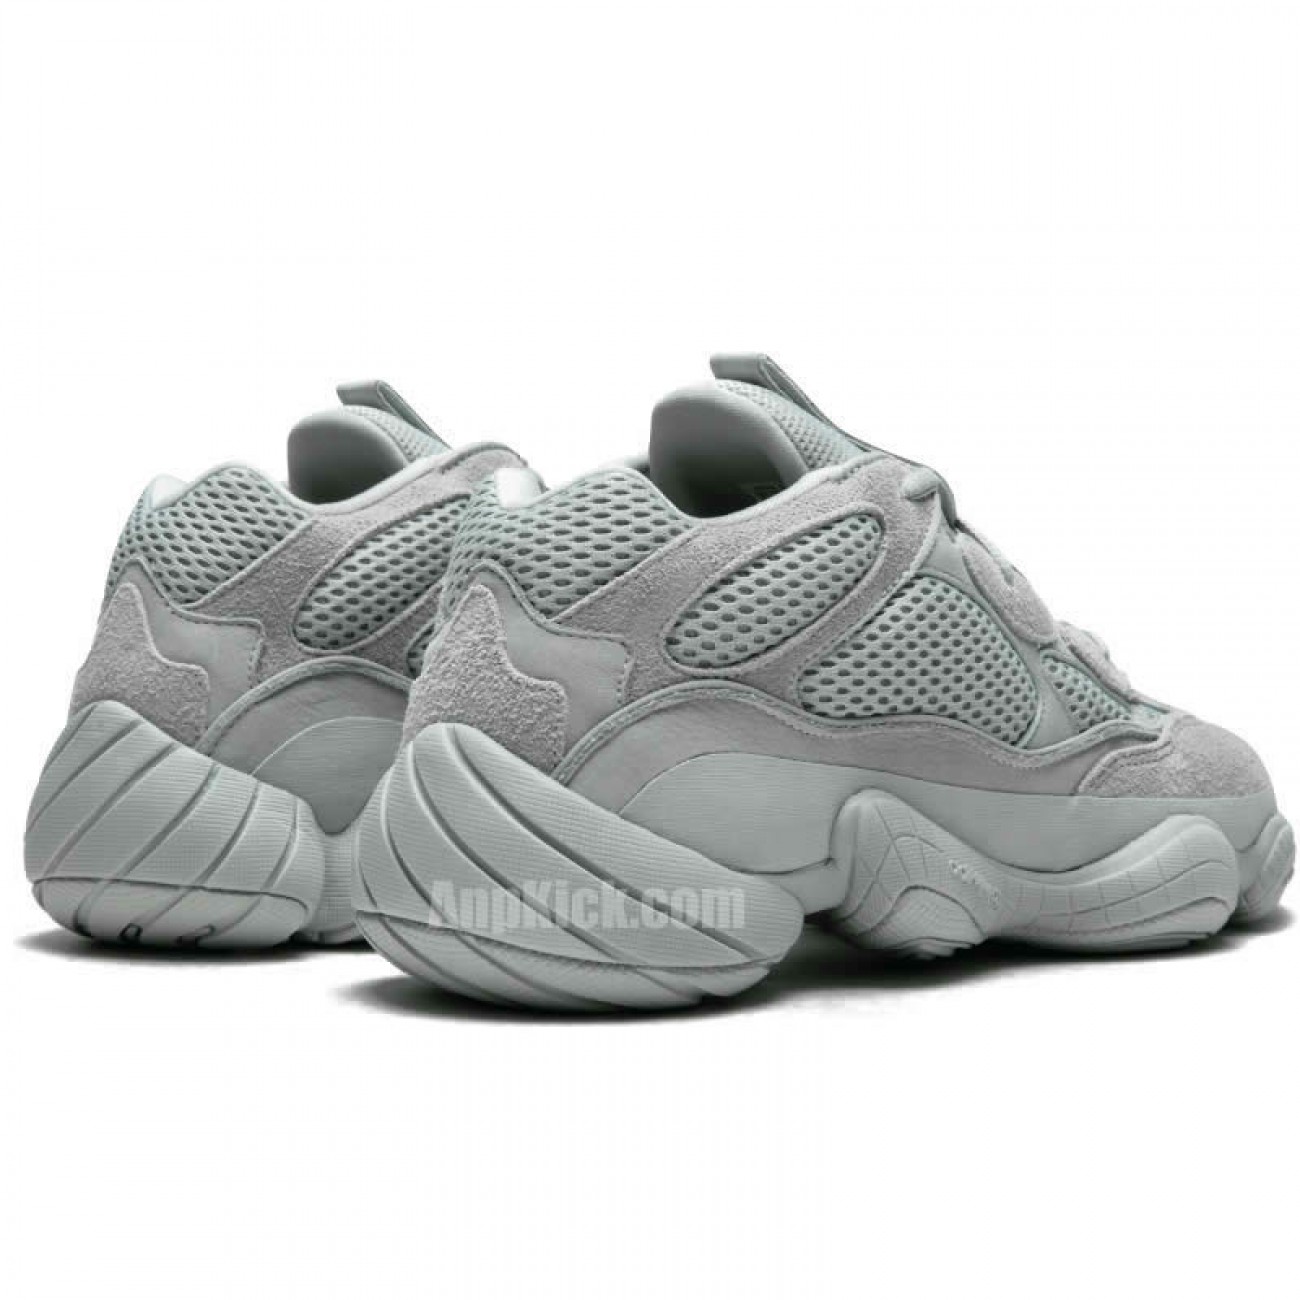 Adidas Yeezy 500 "Salt" Grey On Feet Release Date 2018 Outfit EE7287